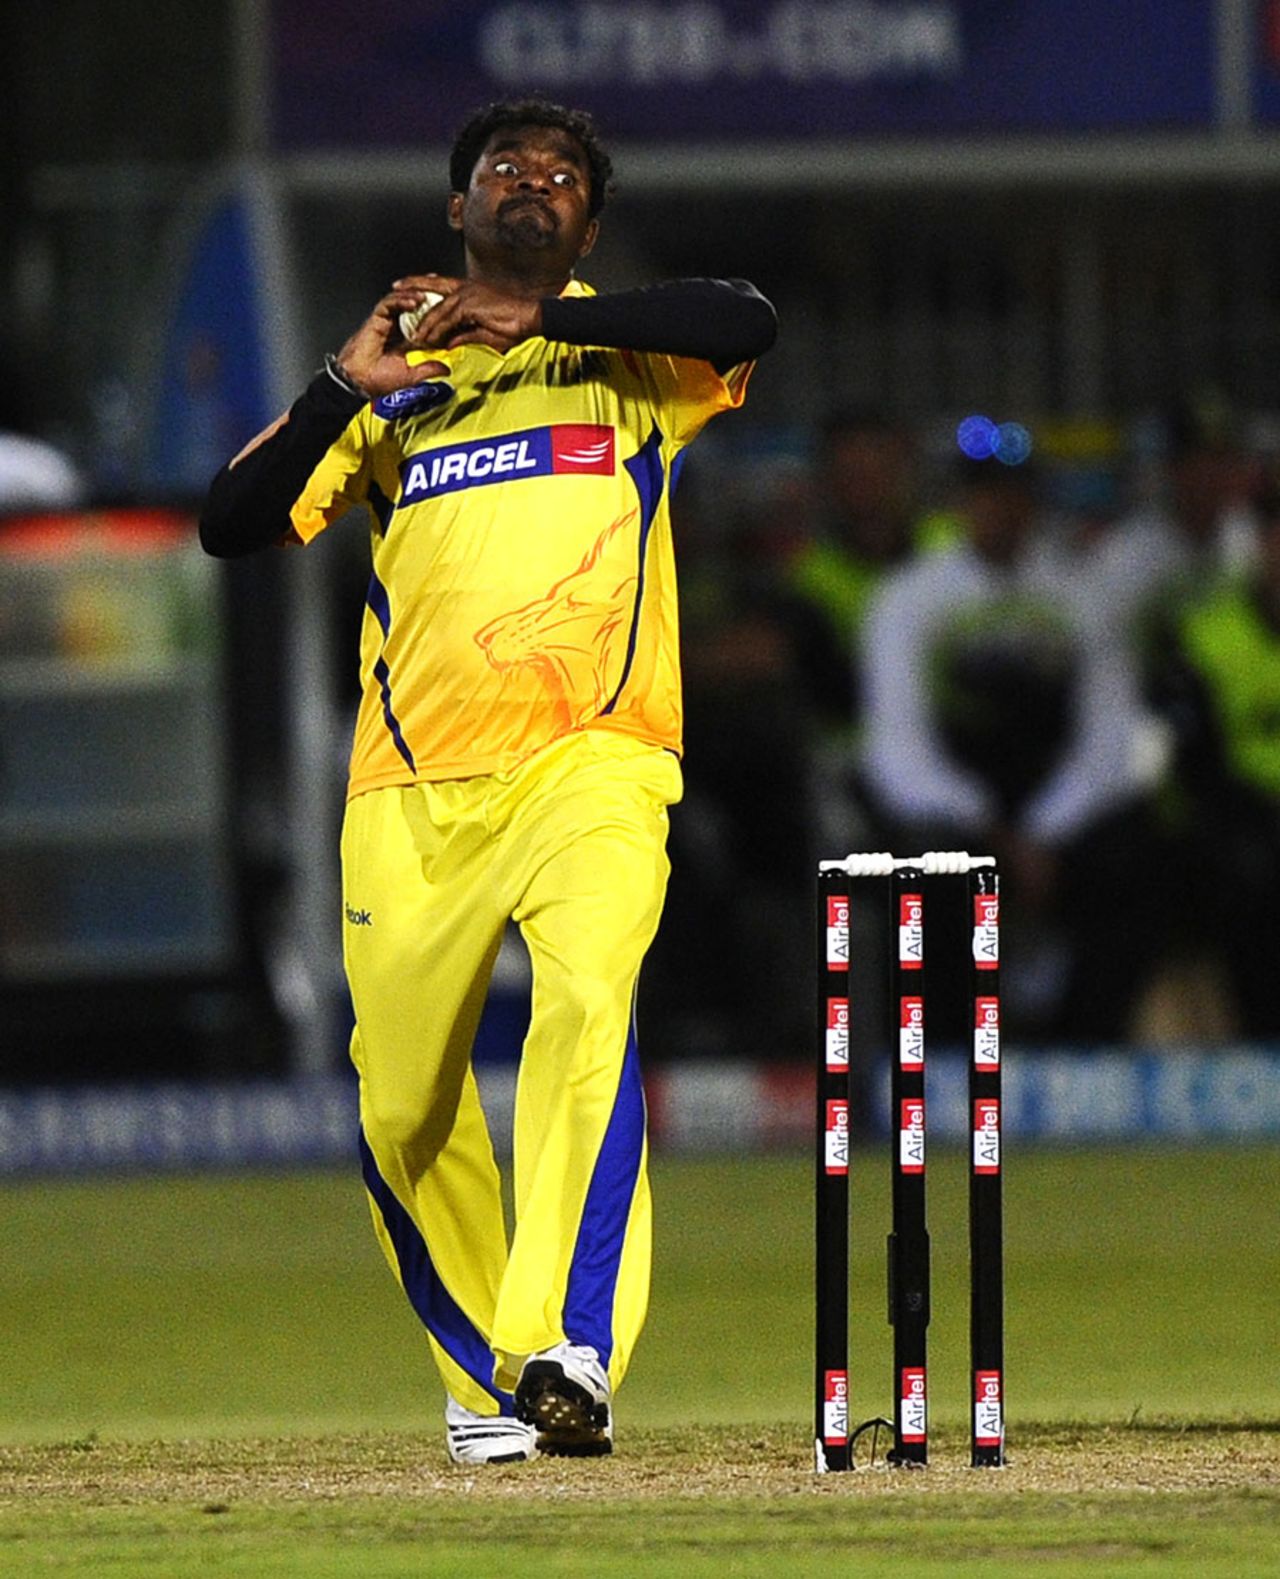 Muttiah Muralitharan is all concentration in his delivery stride, Warriors v Chennai Super Kings, Champions League T20, Port Elizabeth, September 22, 2010